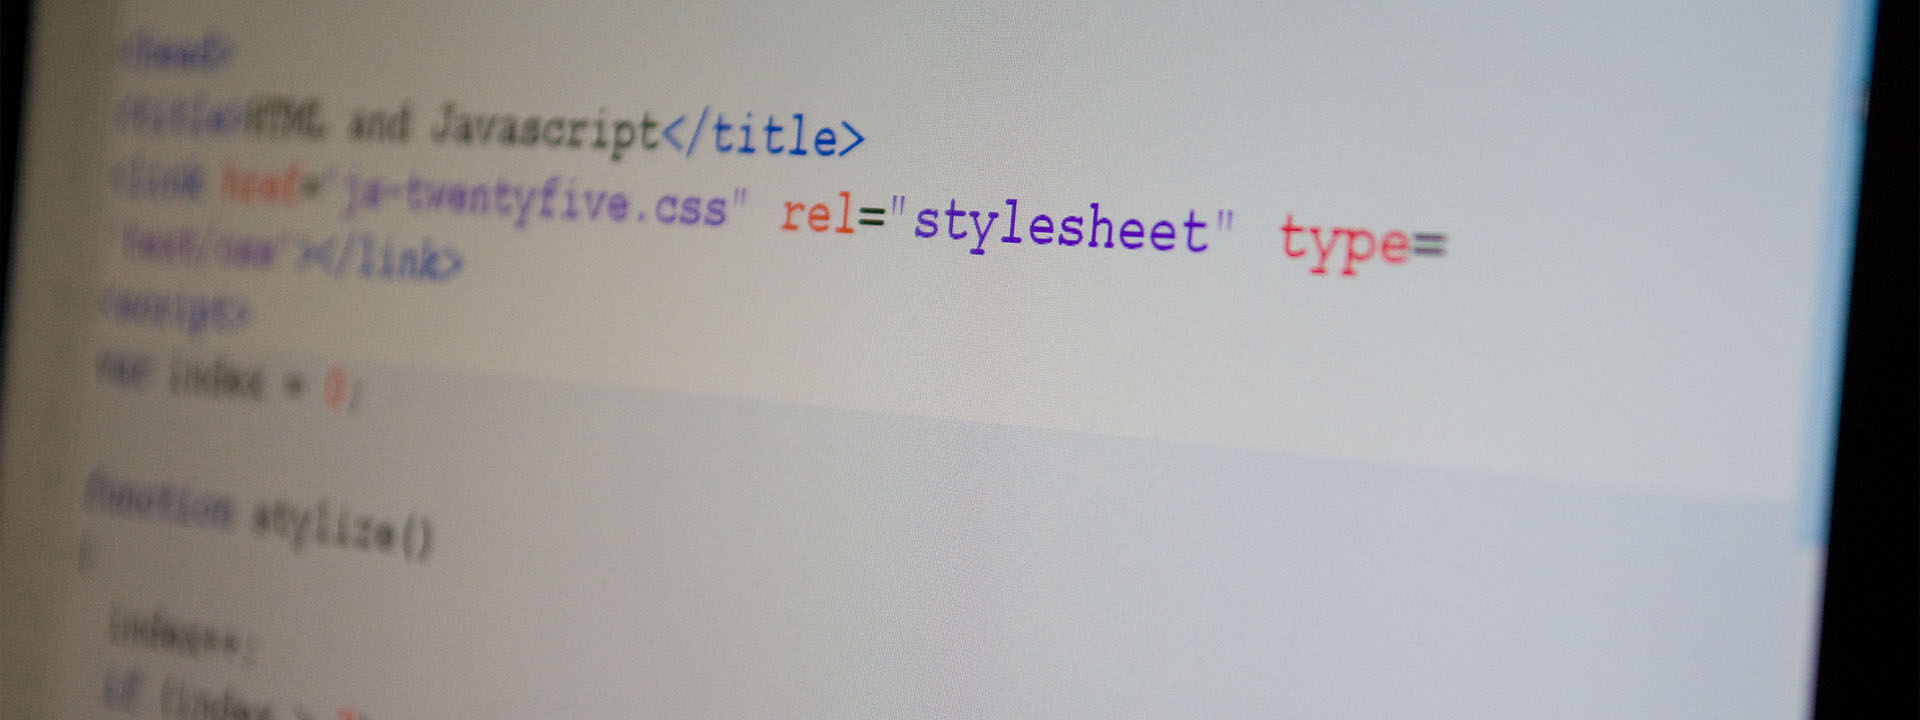 Snippet of html code